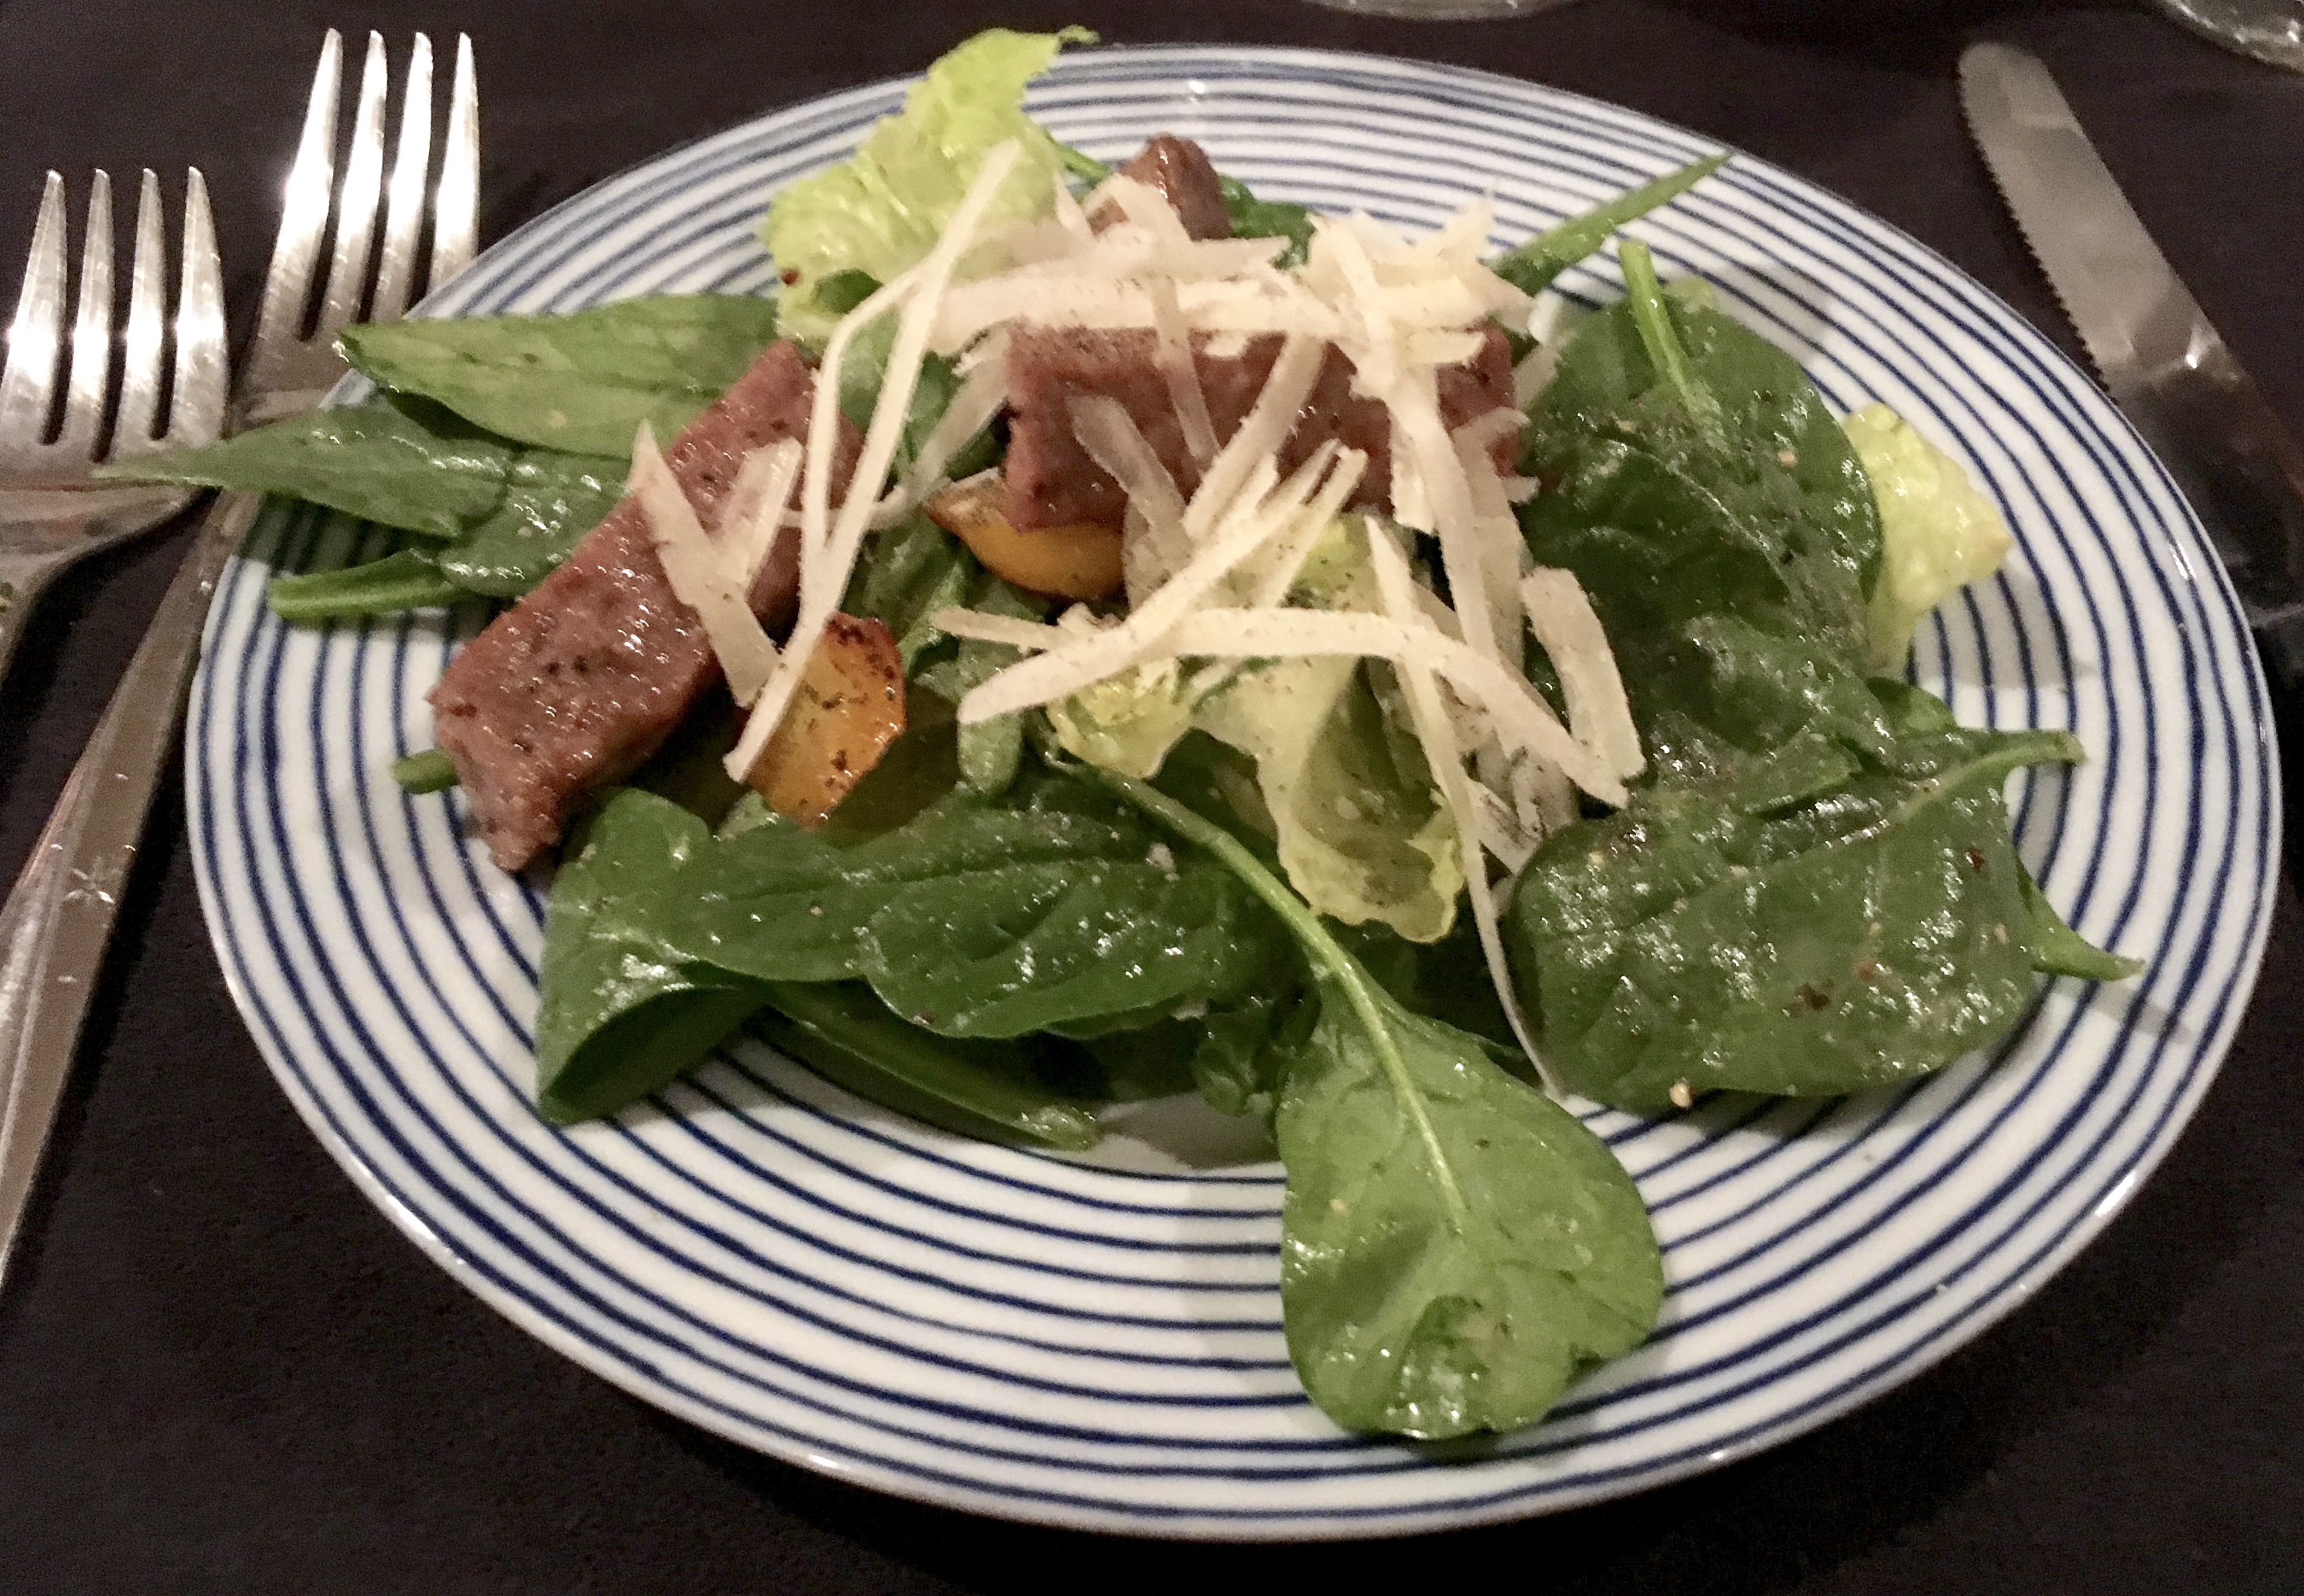 Mixed Greens with Merguez Sausage